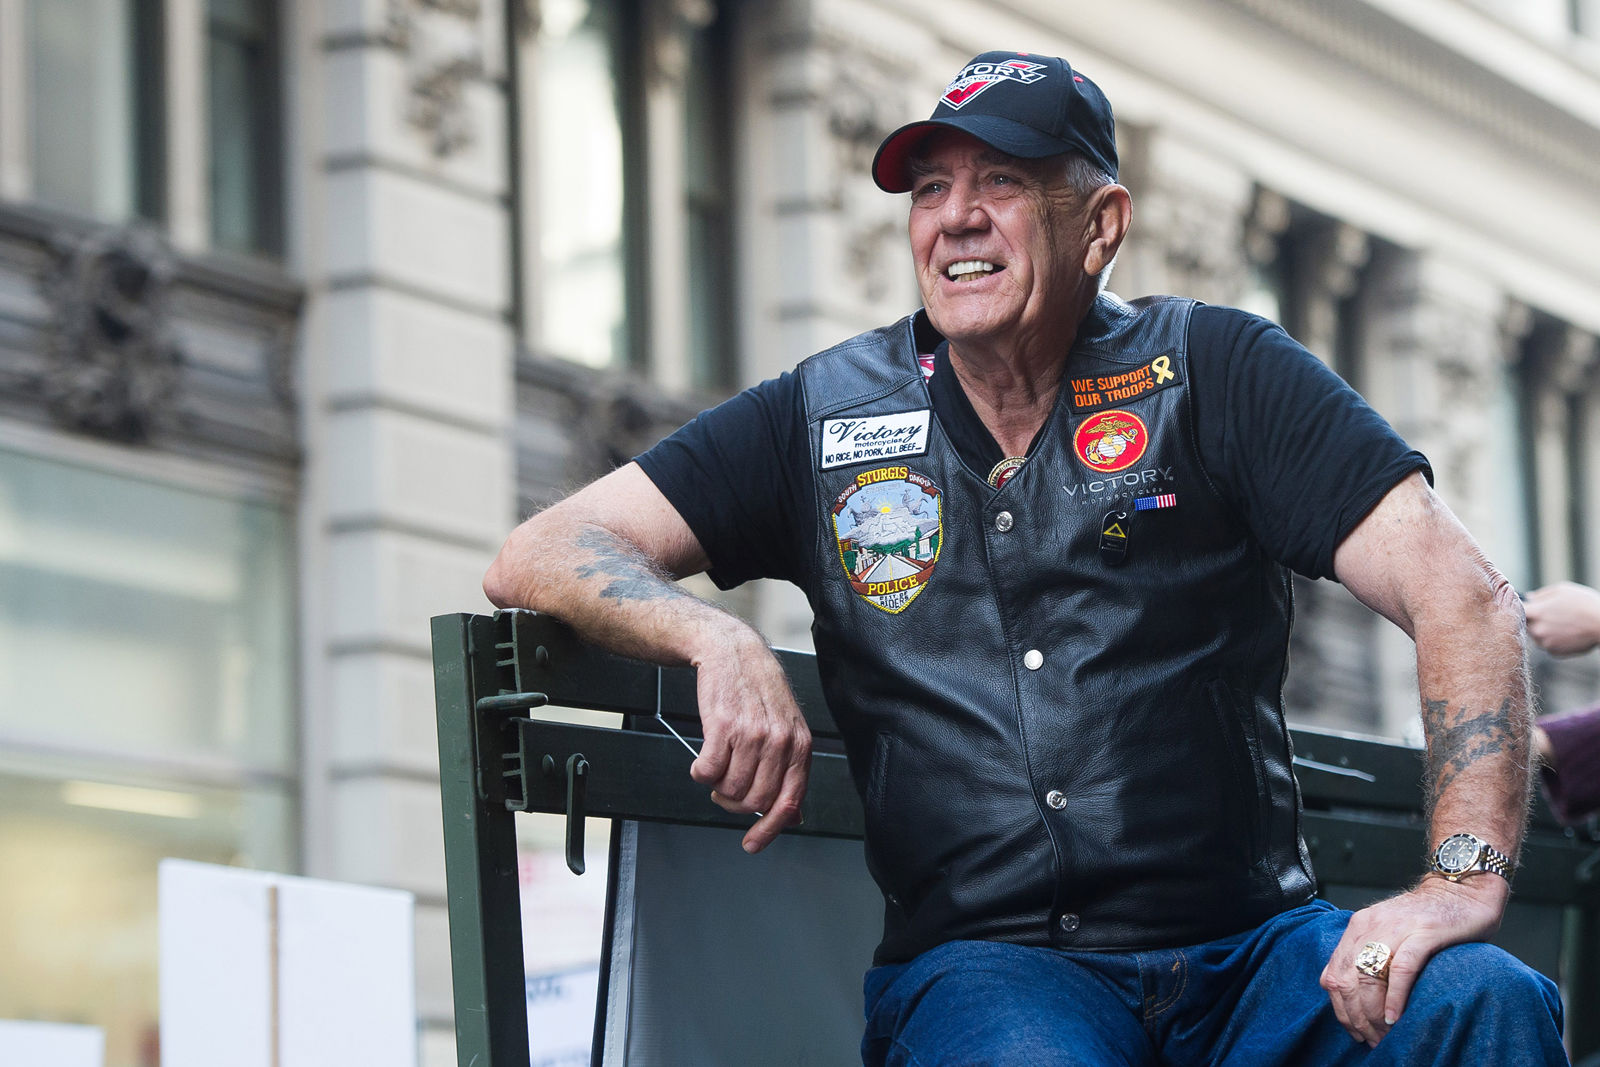 Vietnam veteran and character actor R. Lee “Gunny” Ermey joined 700 Veterans, 12 riding Victory Motorcycles and a 5-ton truck as part of the IAVA/Victory Motorcycles presence at America’s Parade on Tuesday, Nov. 11, 2014 in New York.  Iraq and Afghanistan Veterans of America and Victory Motorcycles have created “The Road Home” campaign where $500 is donated to IAVA for each Victory Motorcycle sold. (Charles Sykes/ AP Images for IAVA and Victory Motorcycles)